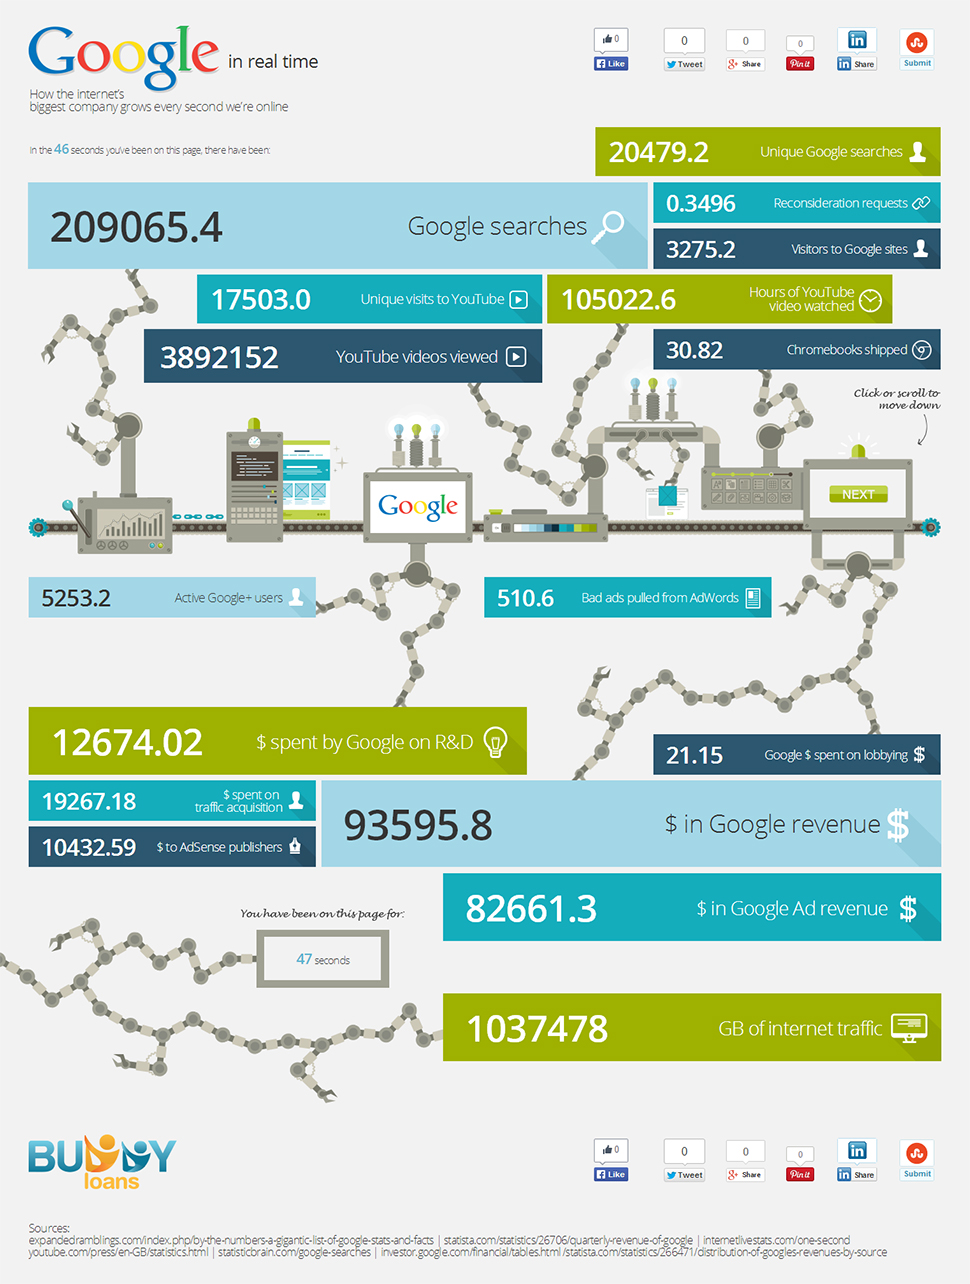 Google in Real Time (Motion Infographic)